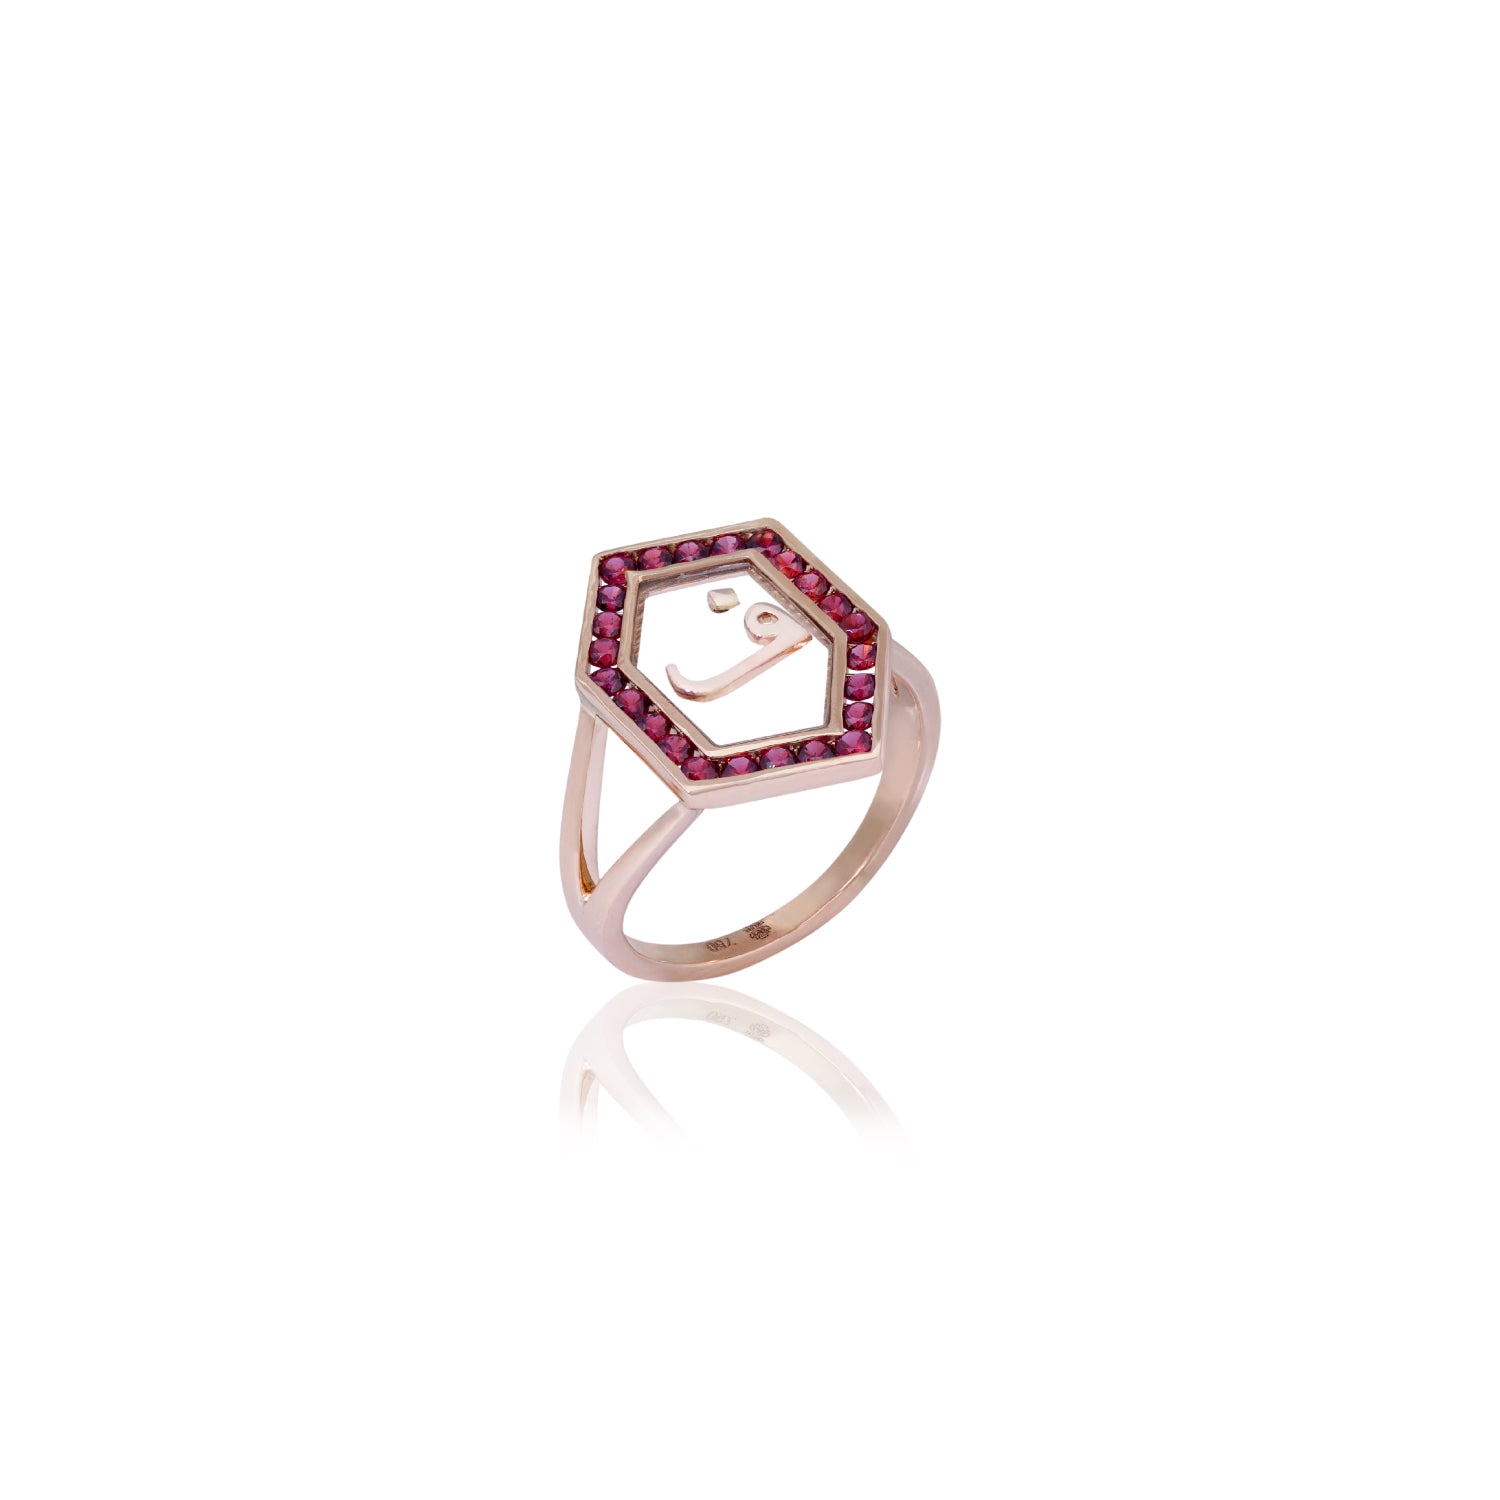 Qamoos 1.0 Letter ف Ruby Ring in Rose Gold